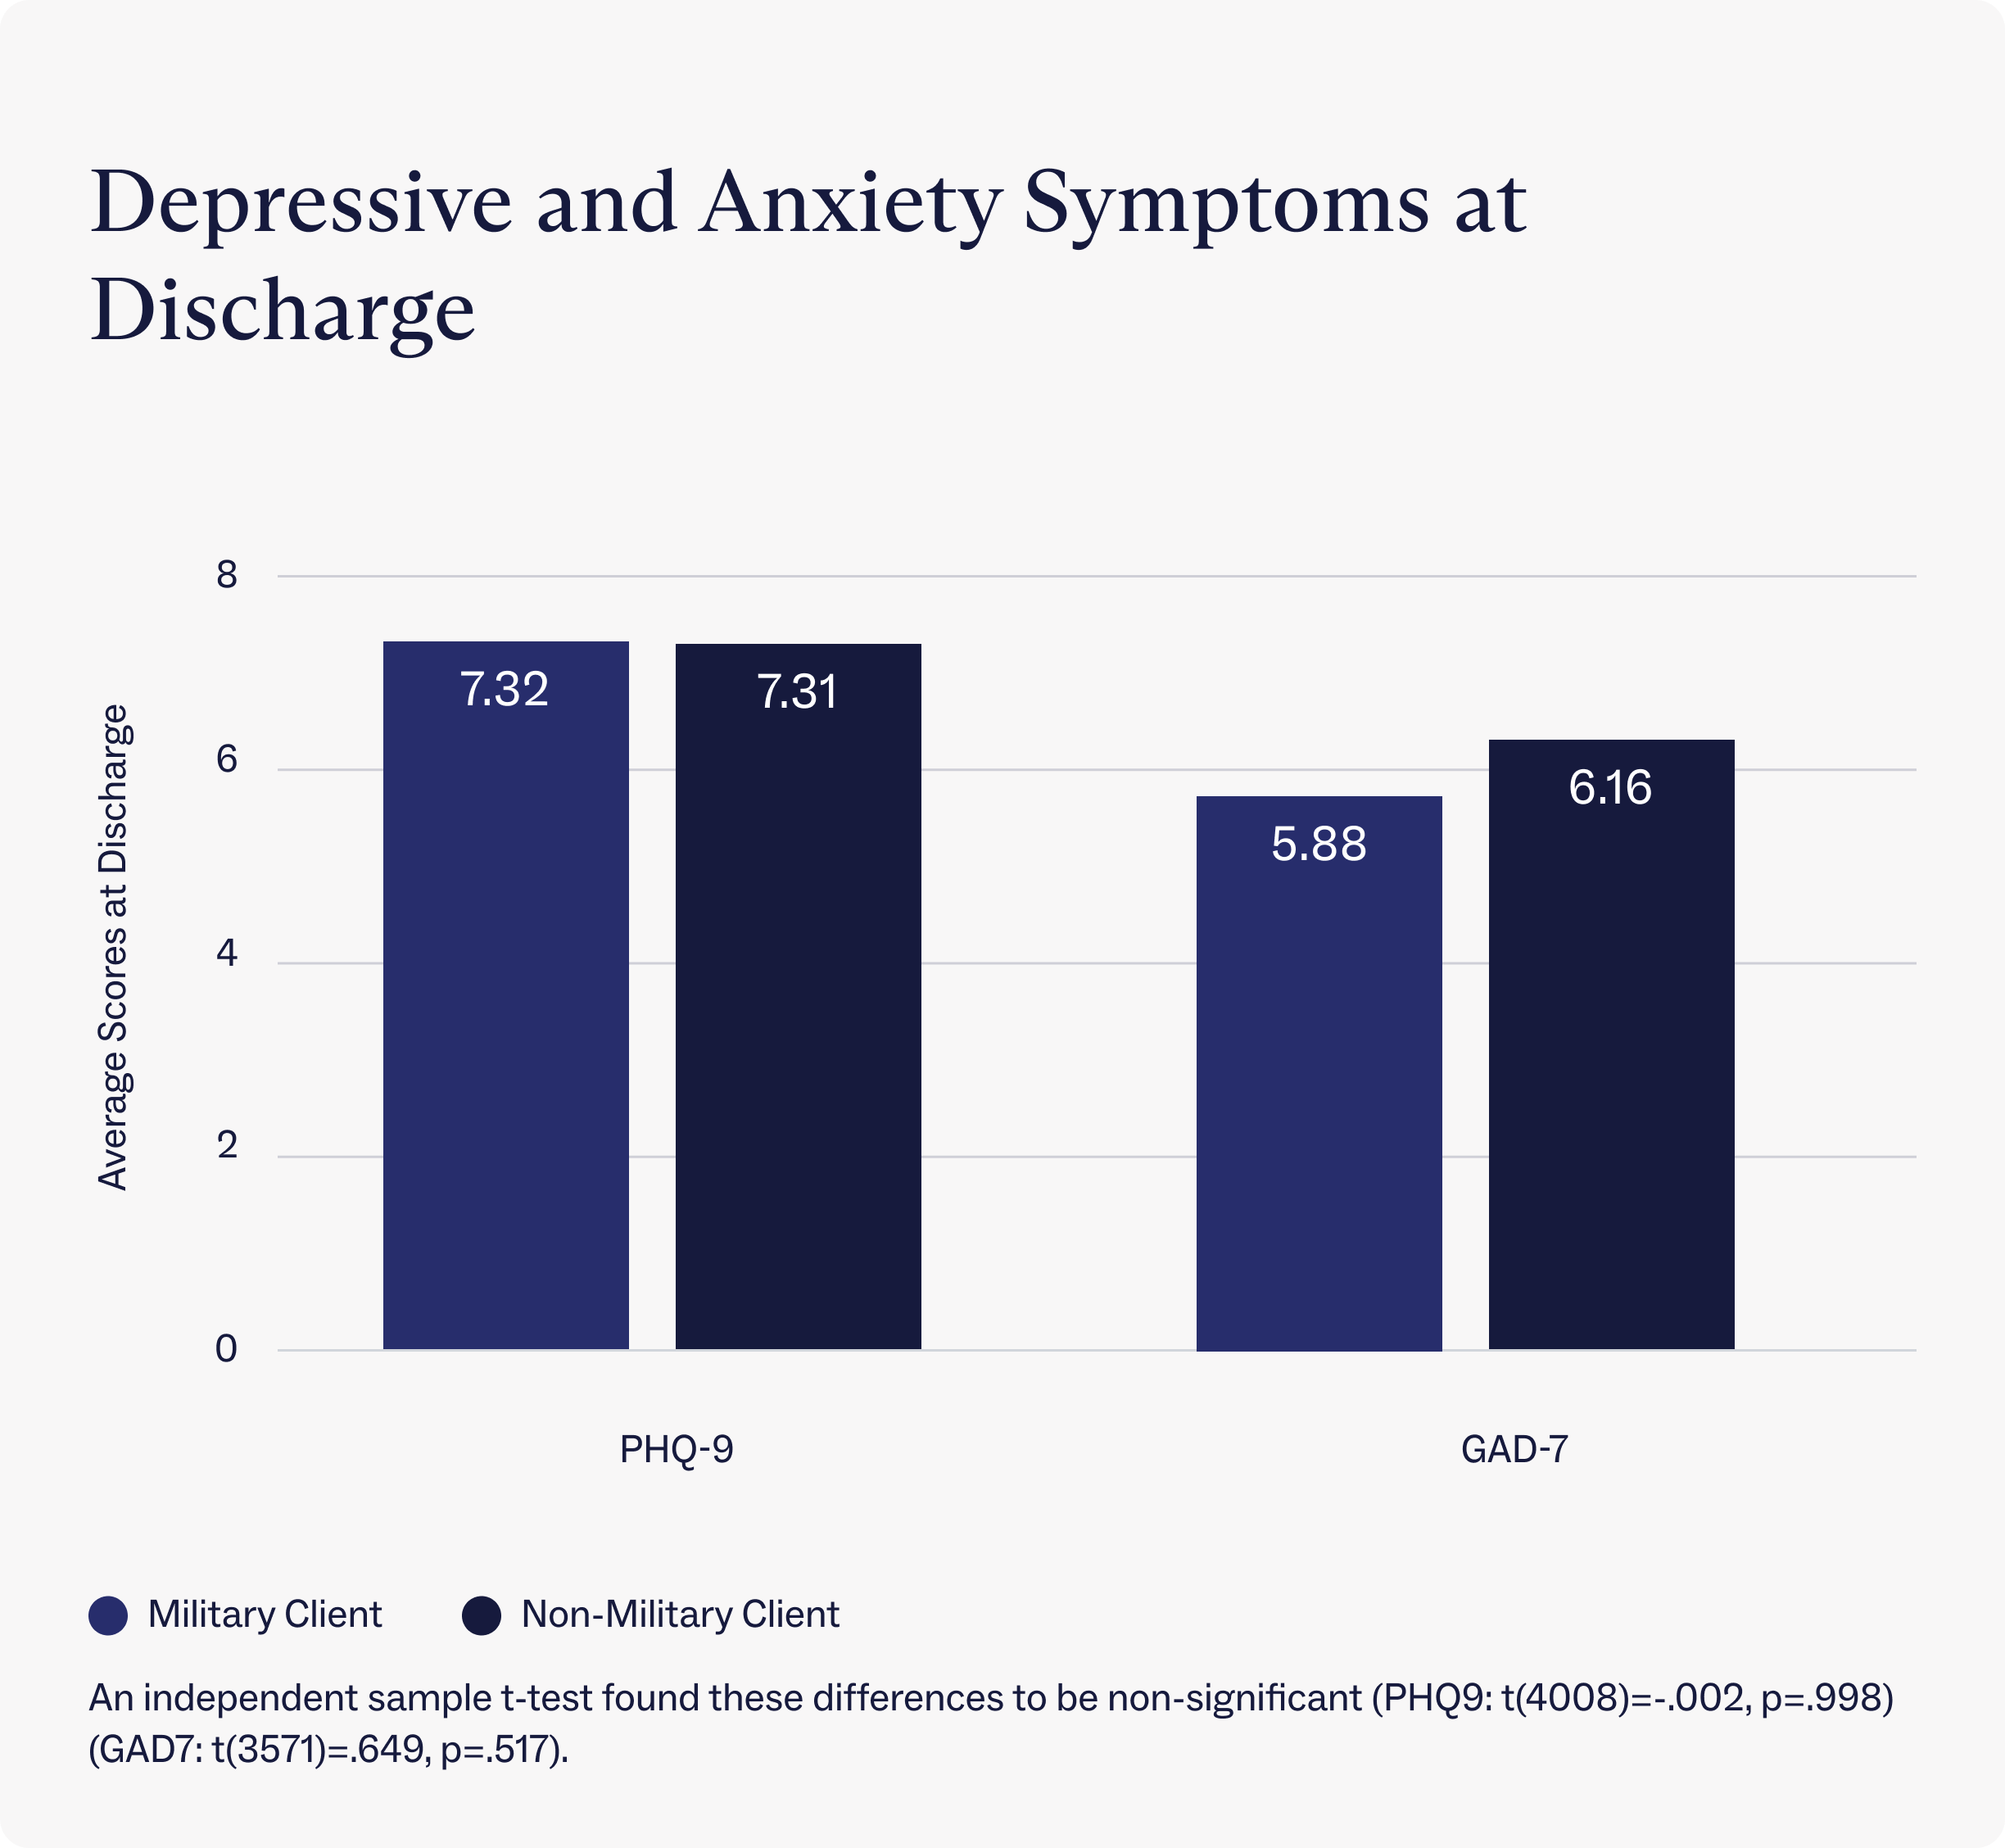 Depressive and anxiety symptoms at discharge for Charlie Health clients